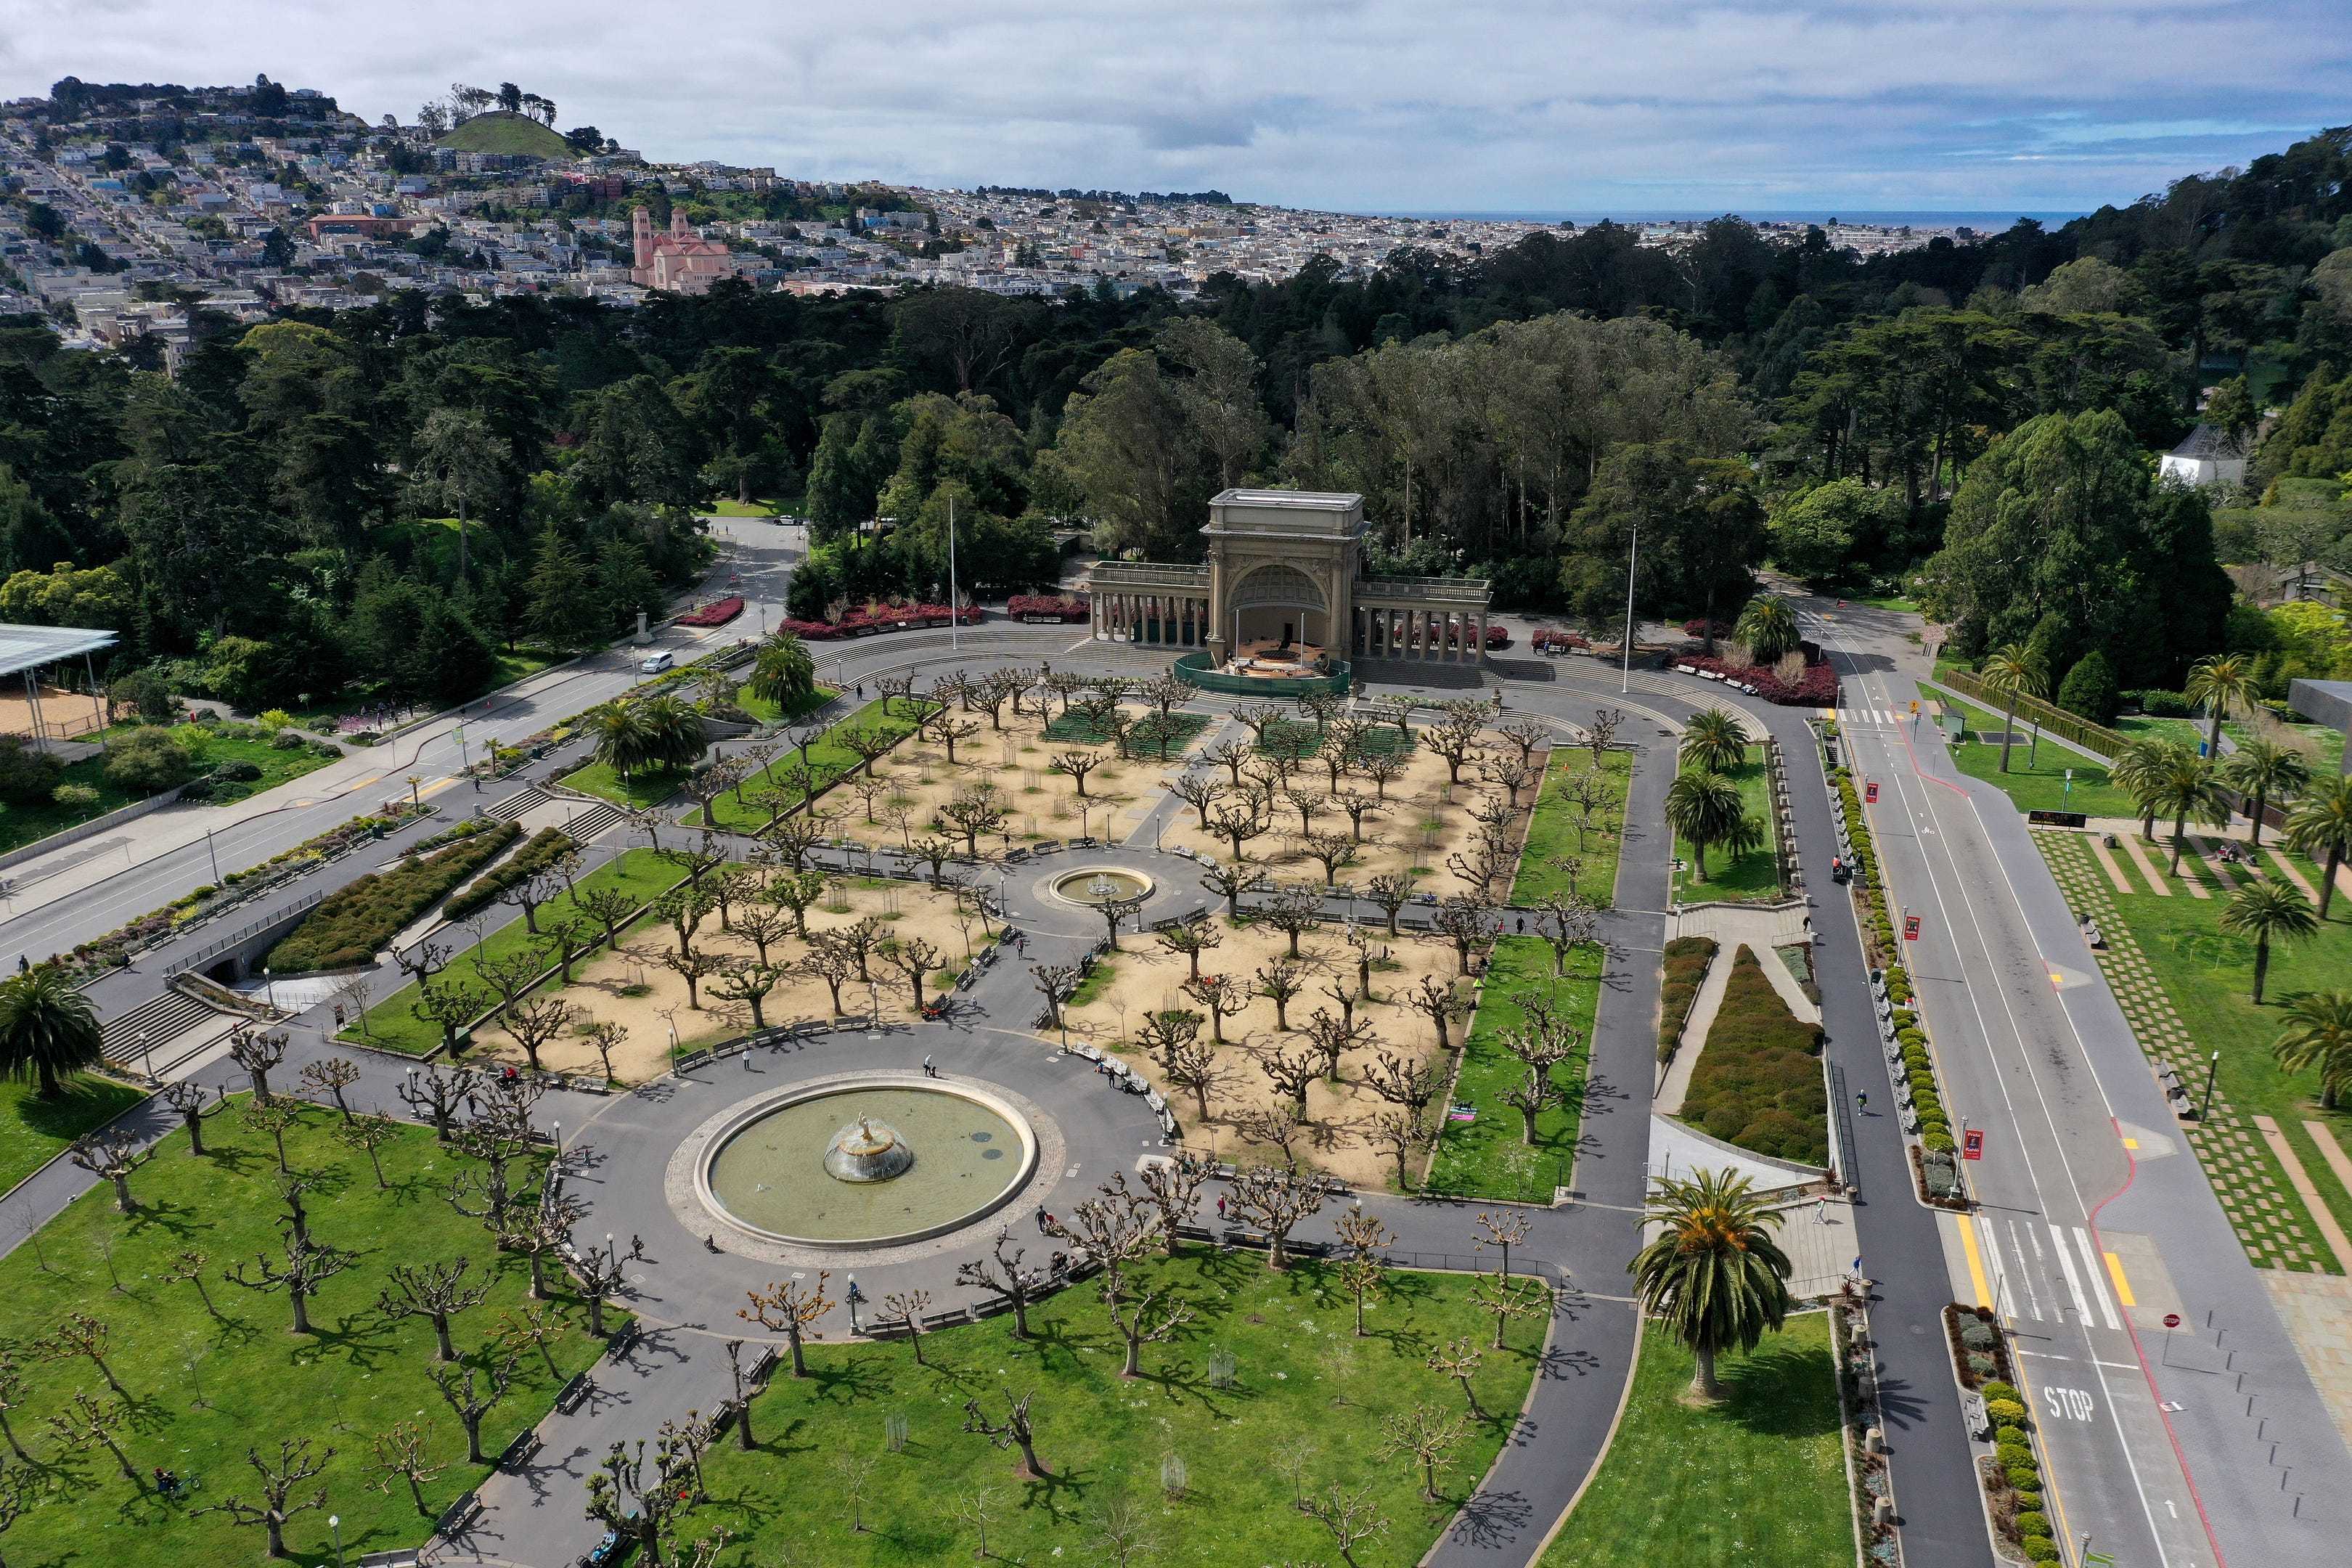 My Favorite Corner of SF The Music Concourse at Golden Gate Park by